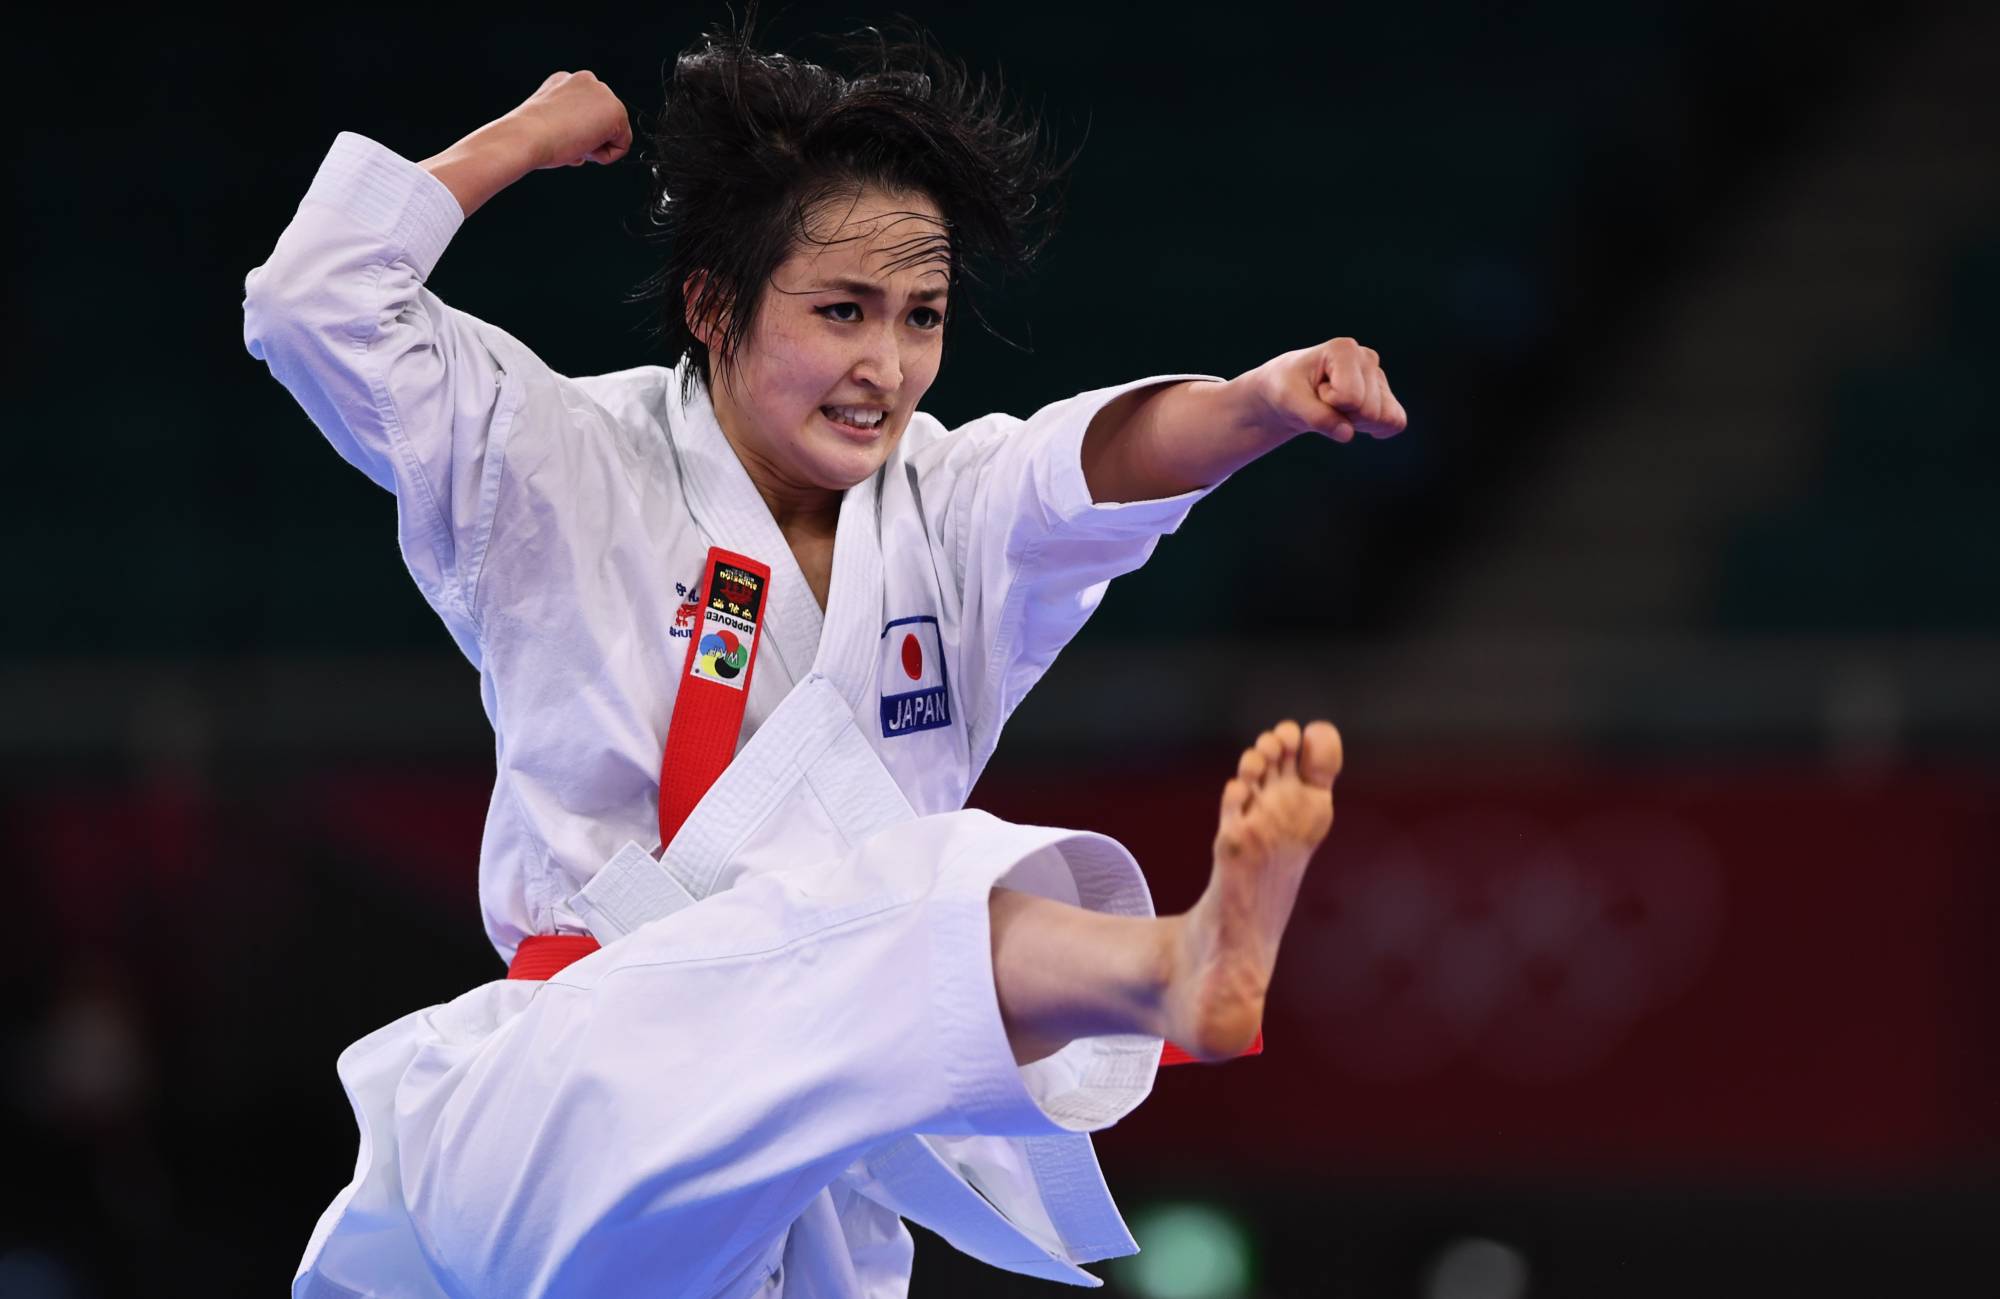 Queens of kata' vying for gold as they kick off karate's Olympics debut |  The Japan Times